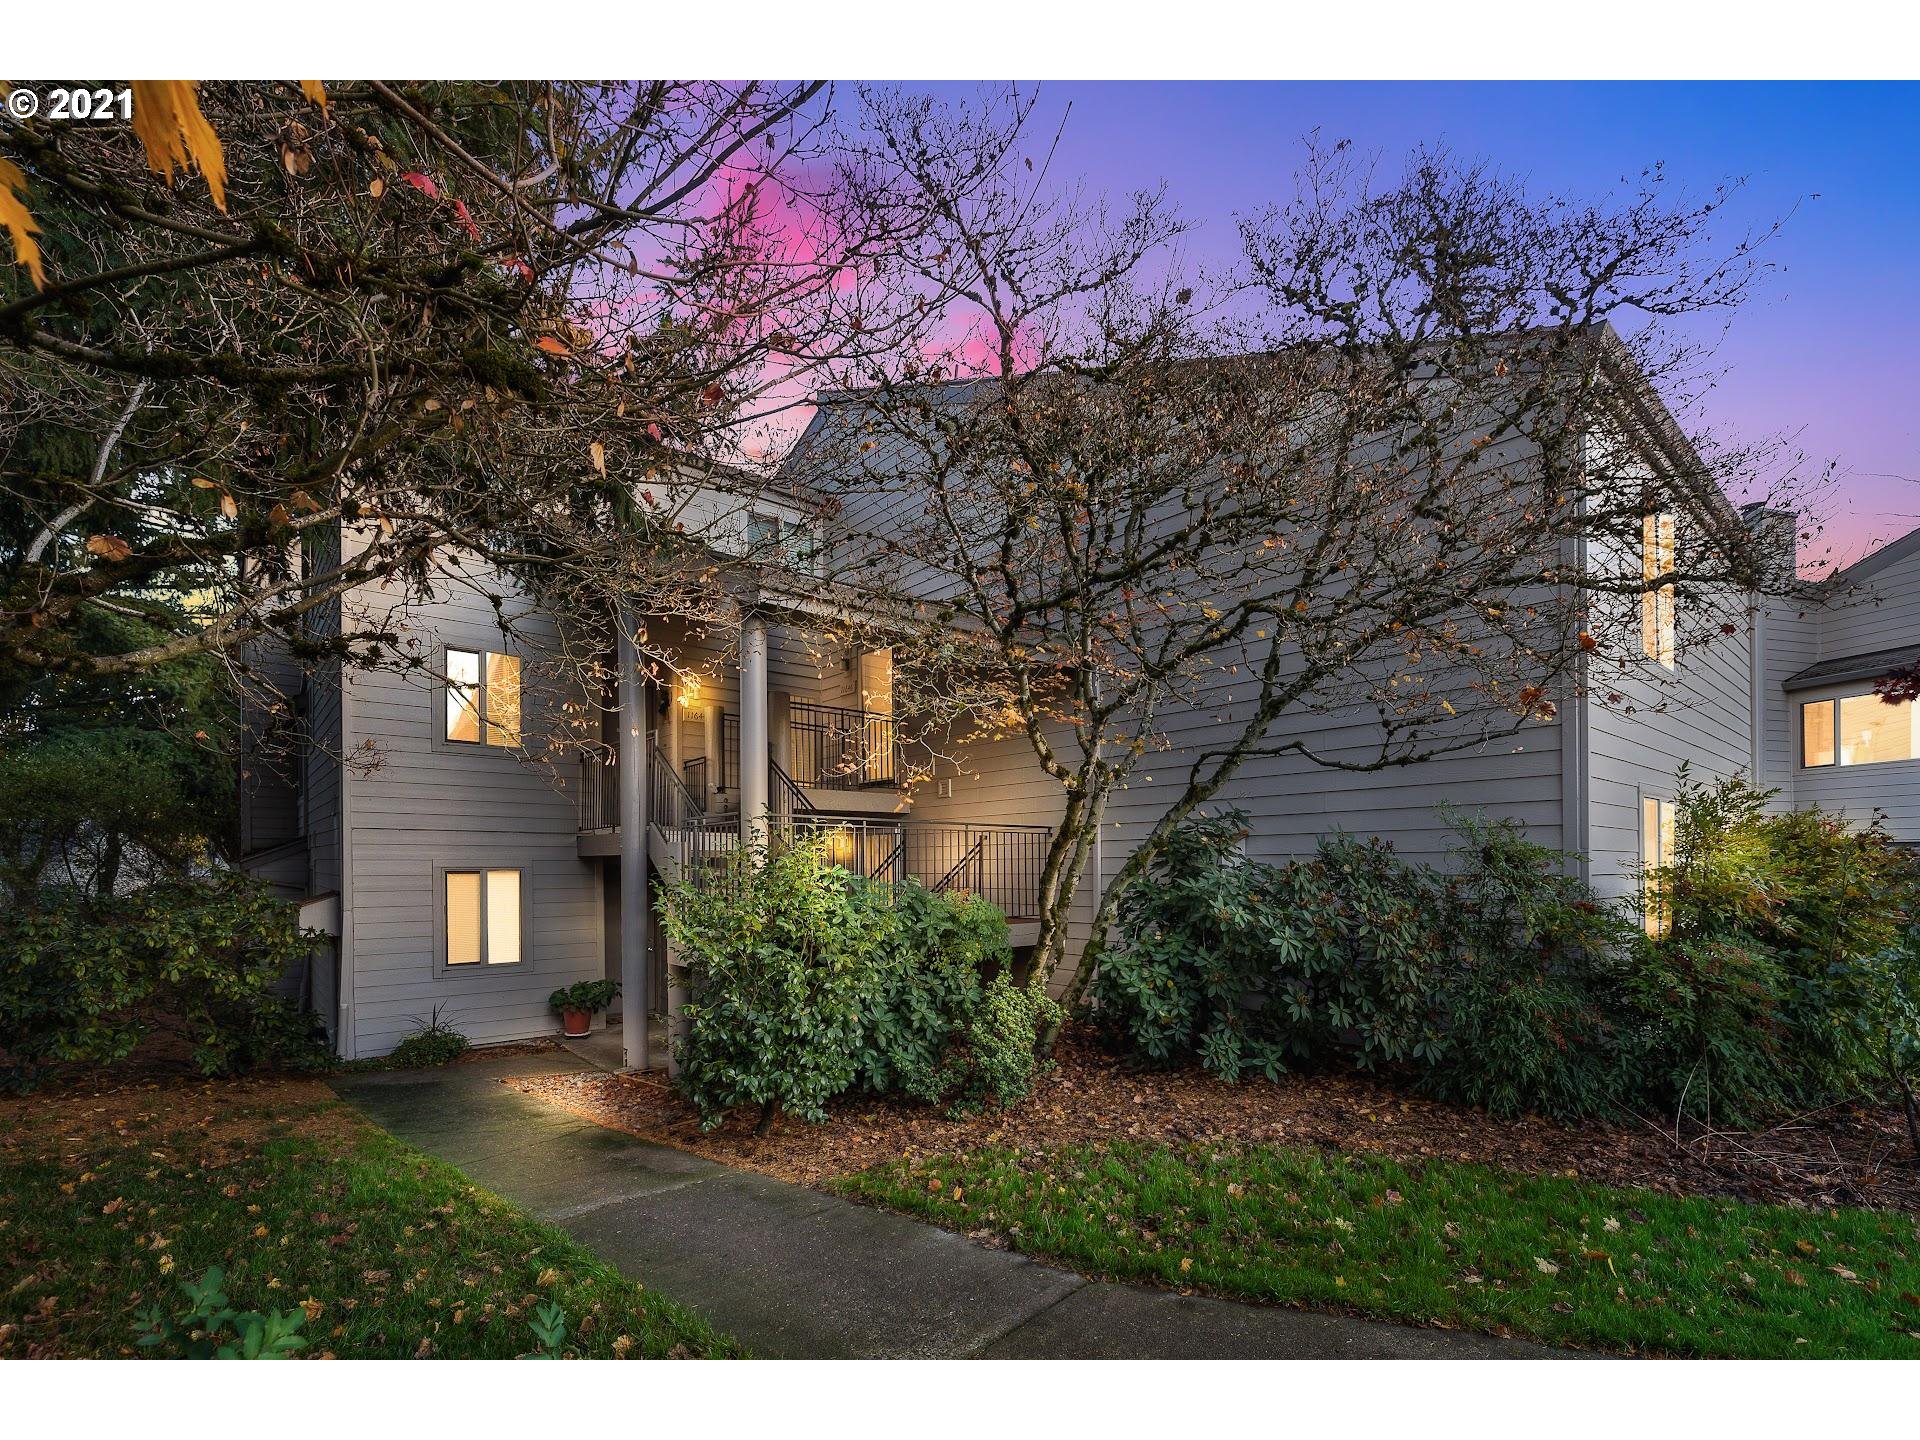 JUST LISTED! Bright, Spacious Contemporary Condo In Beaverton!